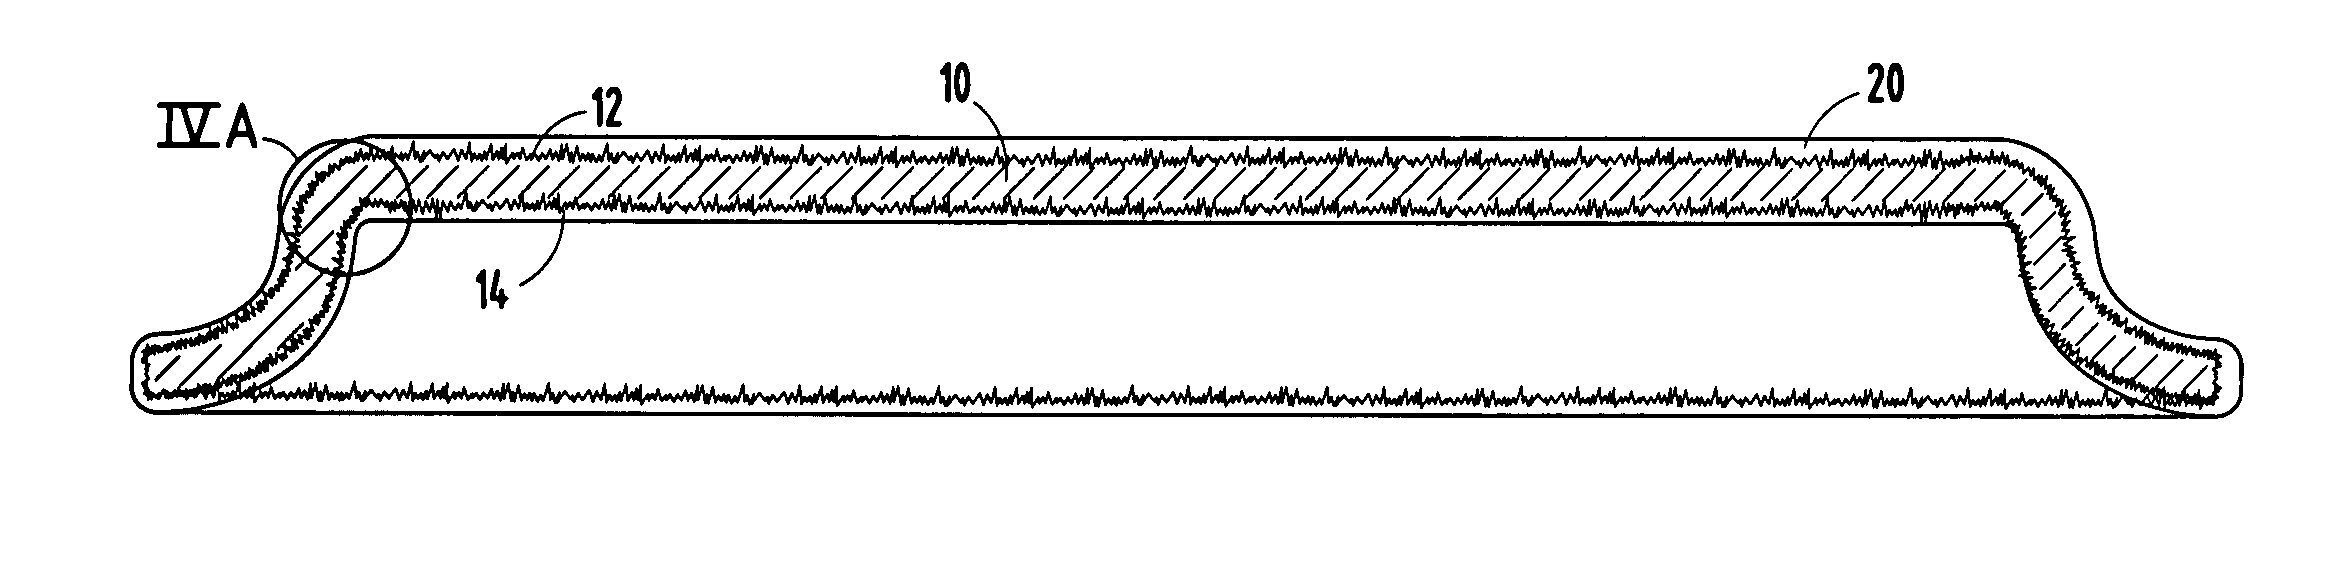 Method to signficantly increase electrophoretic coating thickness and/or to provide a conductive electrophoretically coated surface